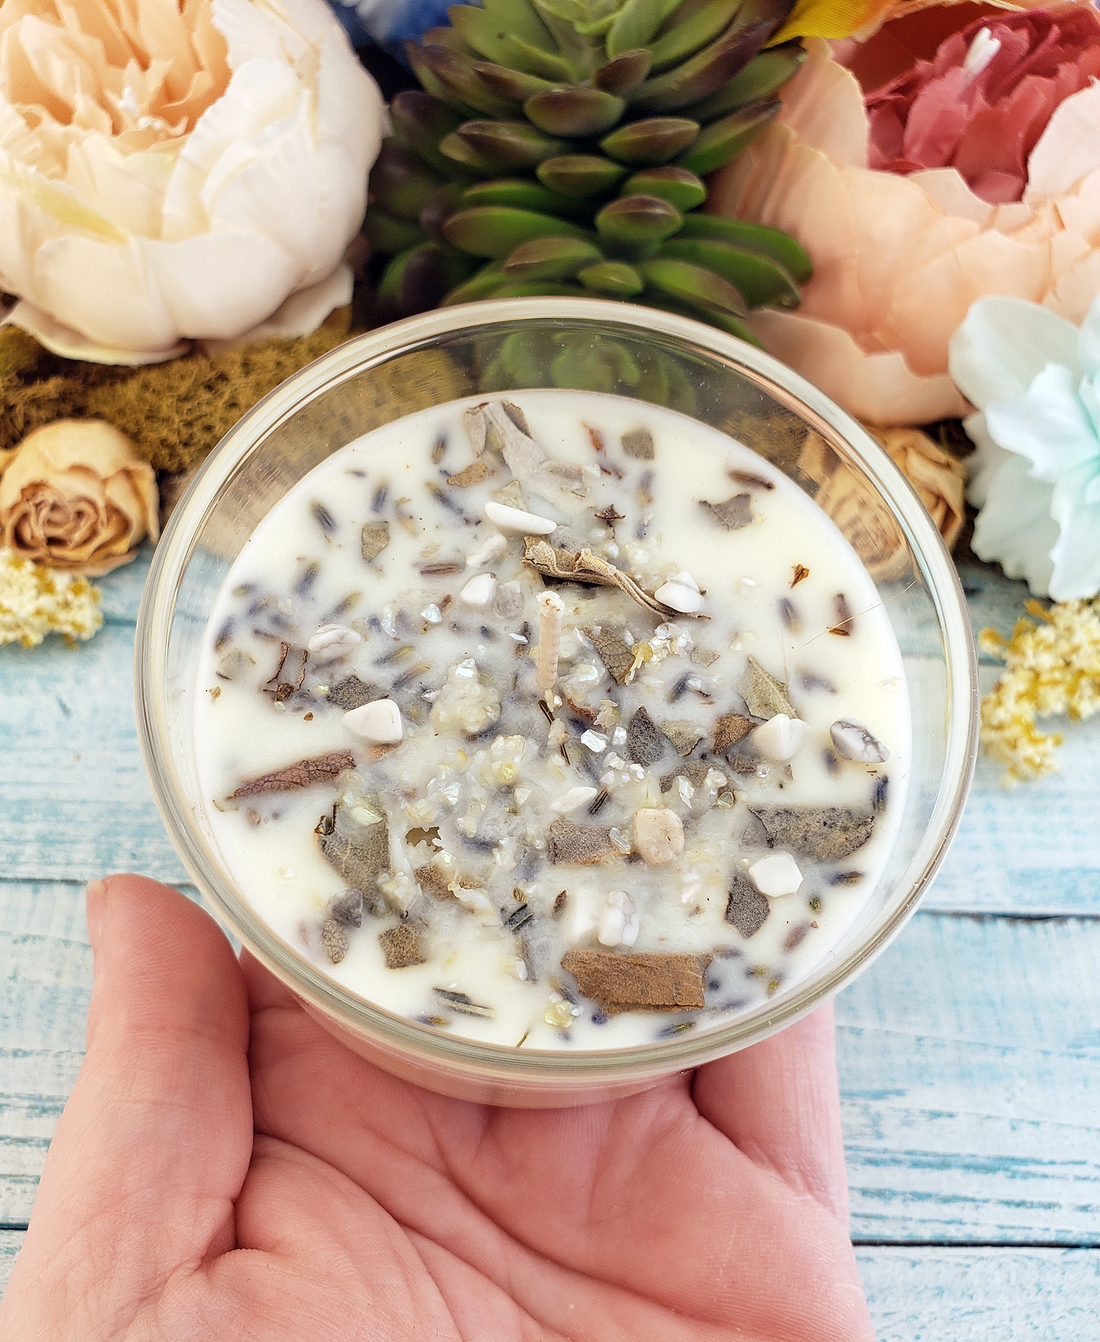 Stress Relief - Coconut Soy Wax Handmade Scented Tumbler Candle - Scented with Essential Oils - Dried Herbs White Sage Lavender - Crystal Chips Howlite Mica - Lavender Bergamot Chamomile Peppermint Scented